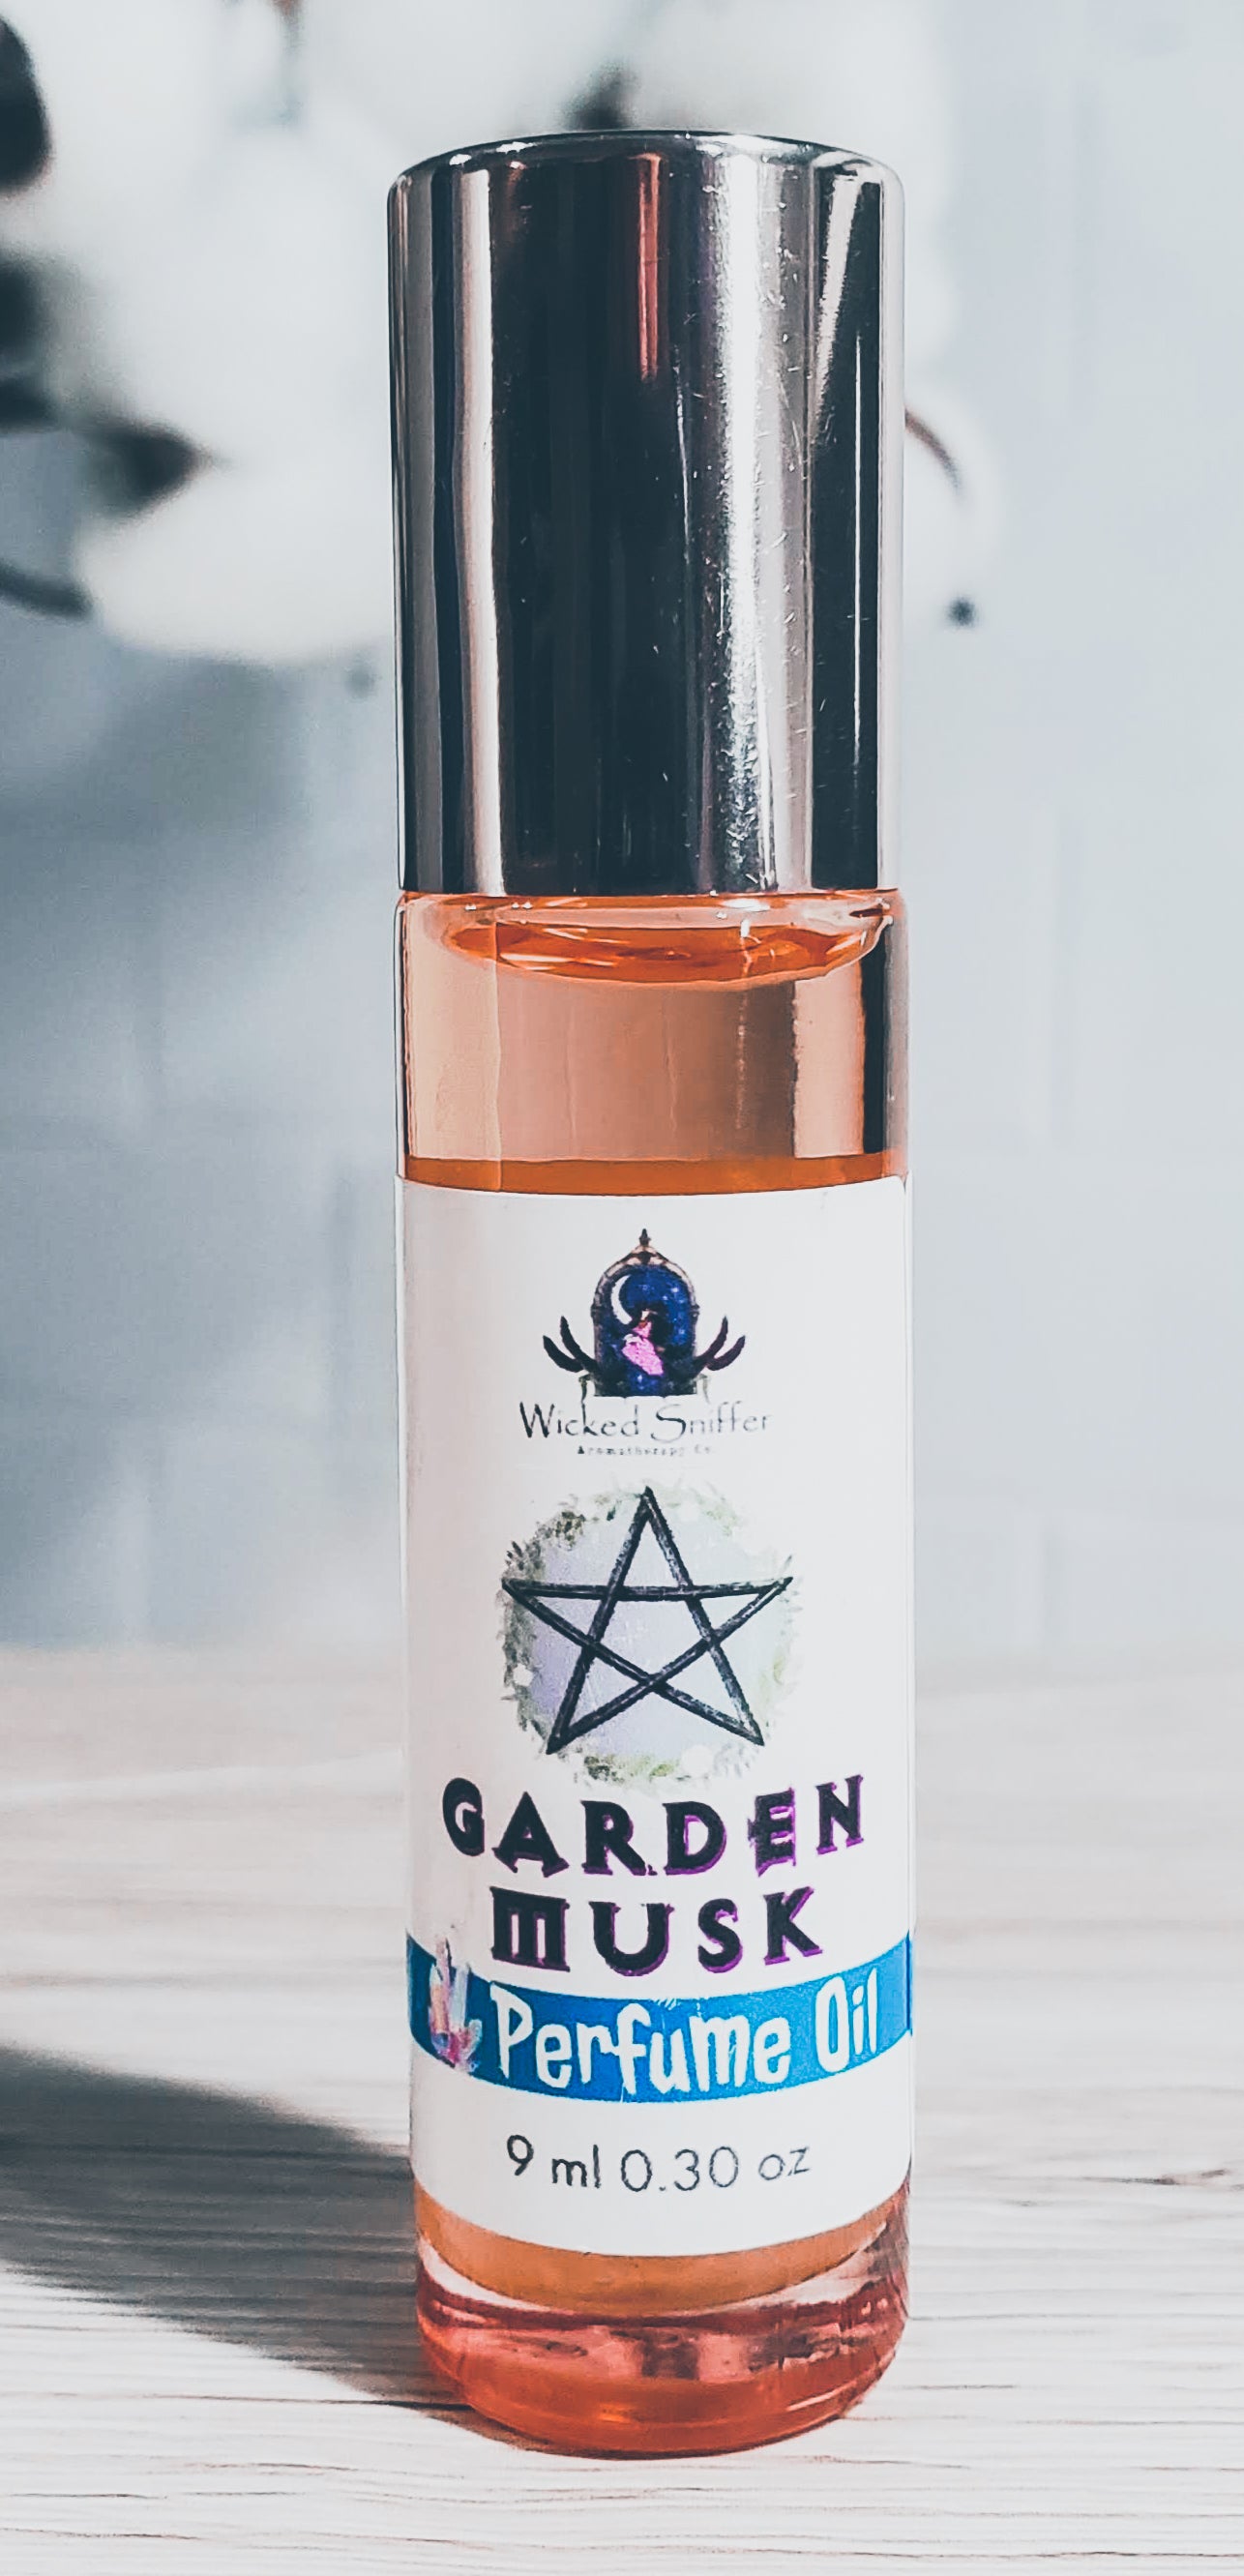 Rose gold bottle with white label